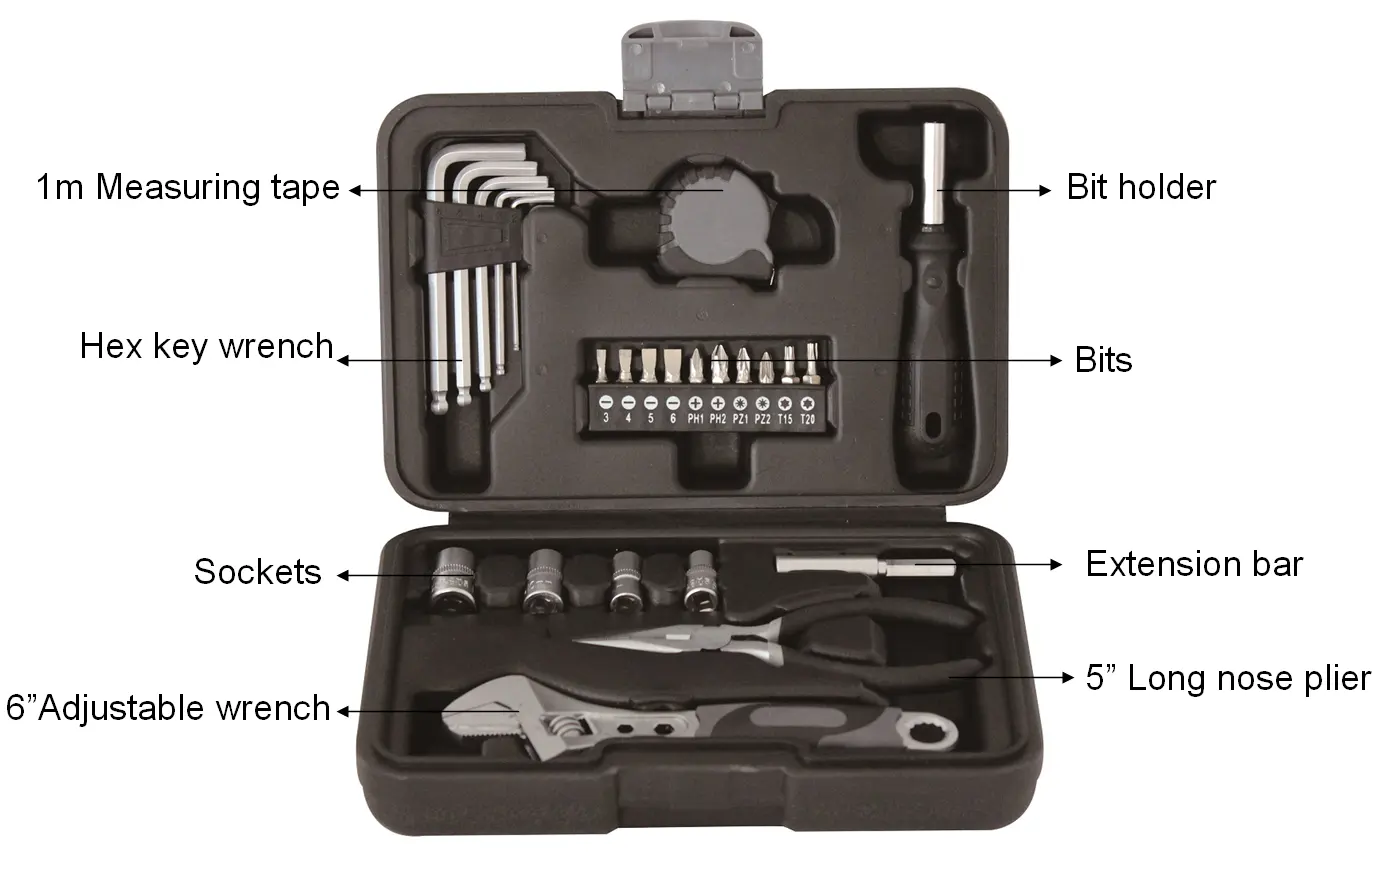 Gift Tool Set 25pcs Promotional Home Use Hand Repair Gift Tool Set With Plastic Box Tools Kit